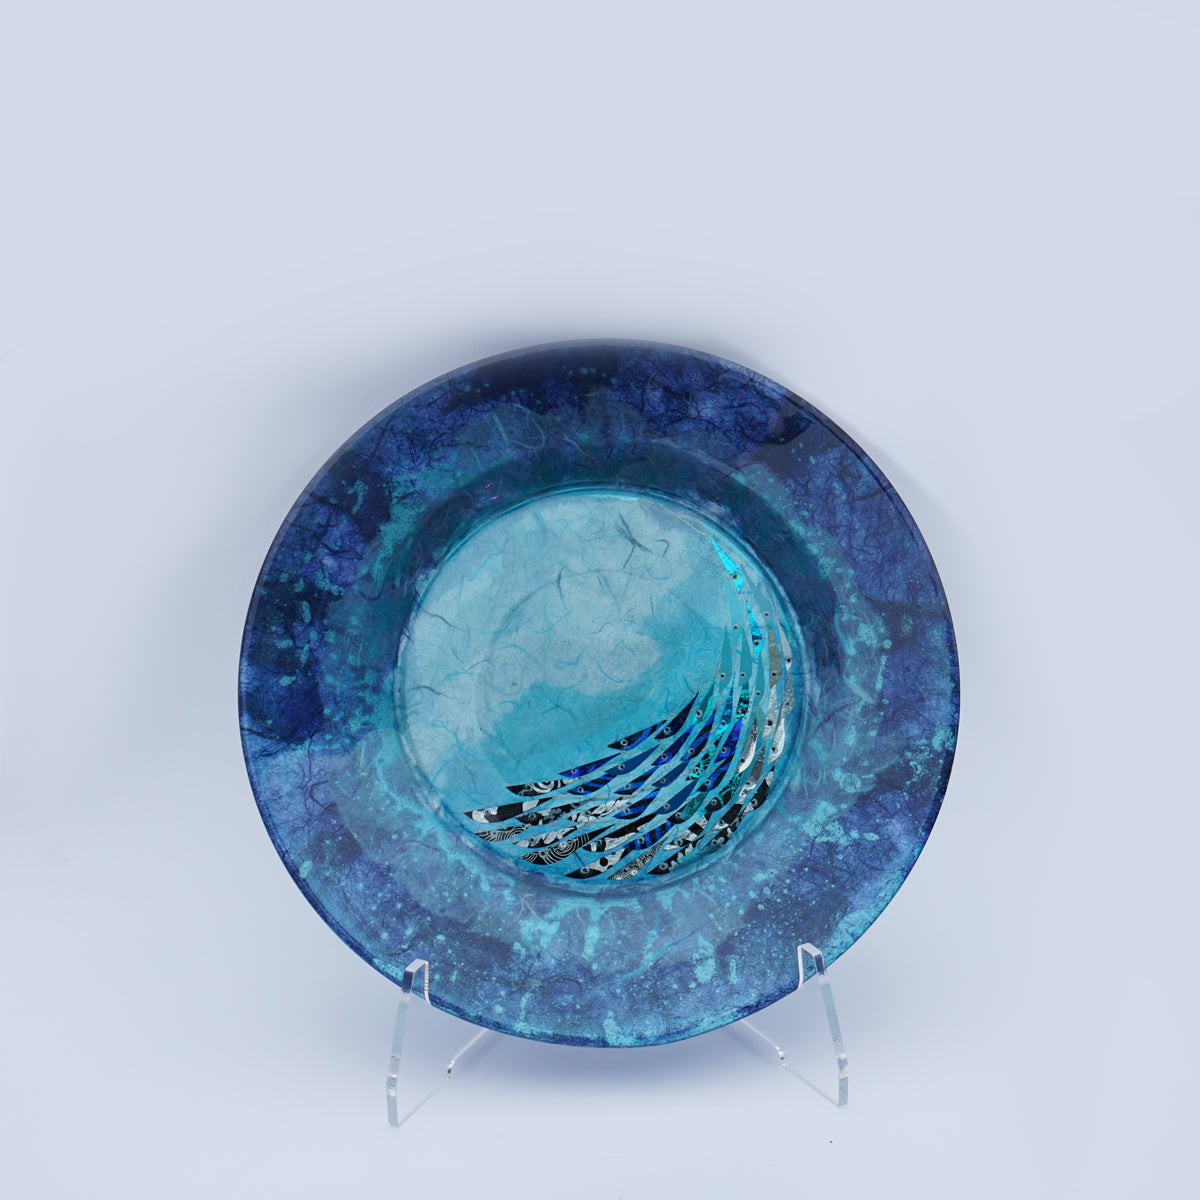 Large Plate - Navy Blue & Silver